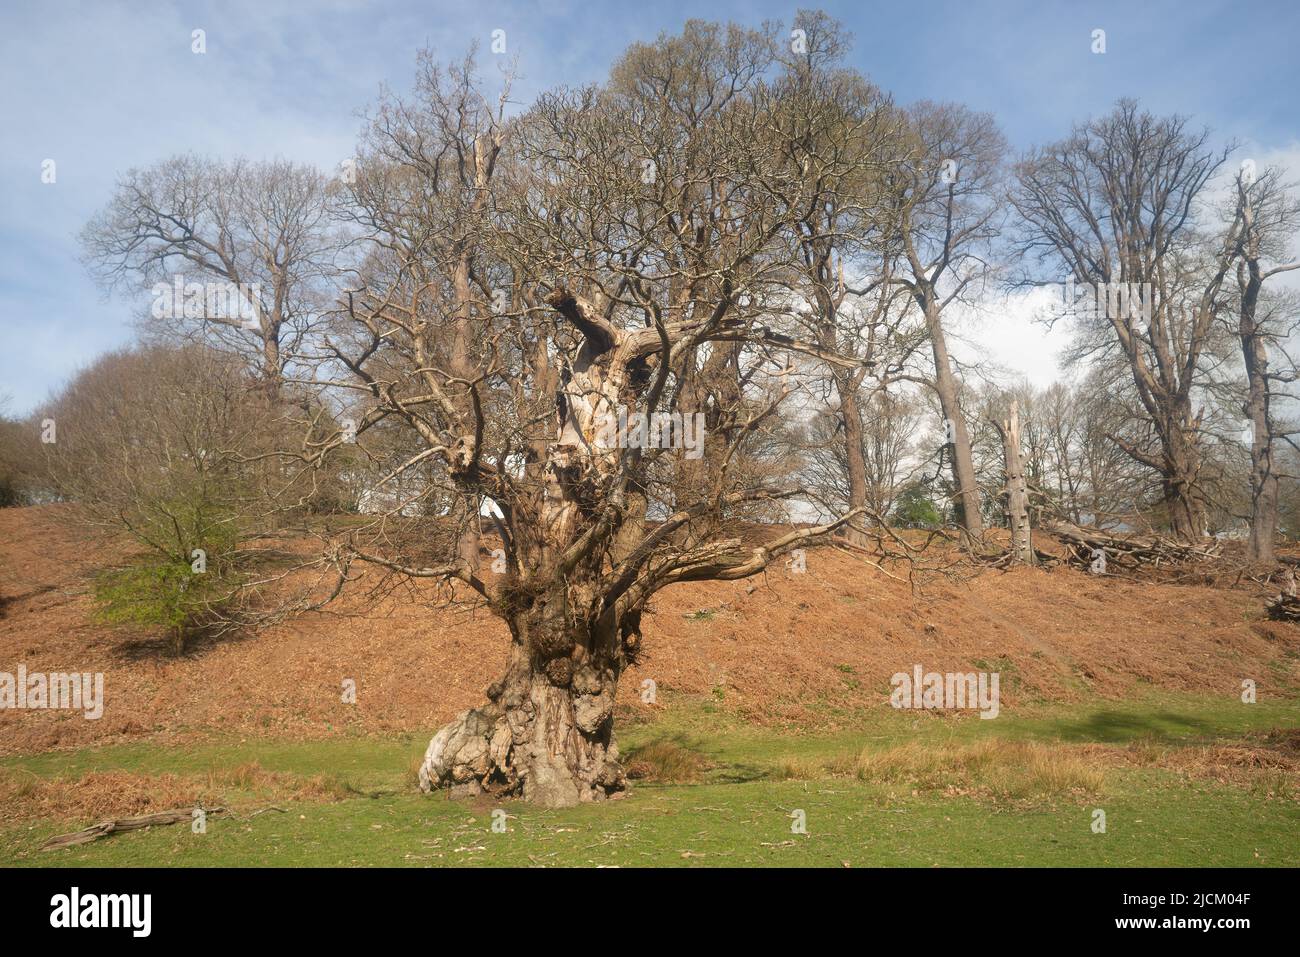 Old Quercus robur ancient oak tree bedraggled remains with imagination looks like a horned beast trapped on the trunk Stock Photo